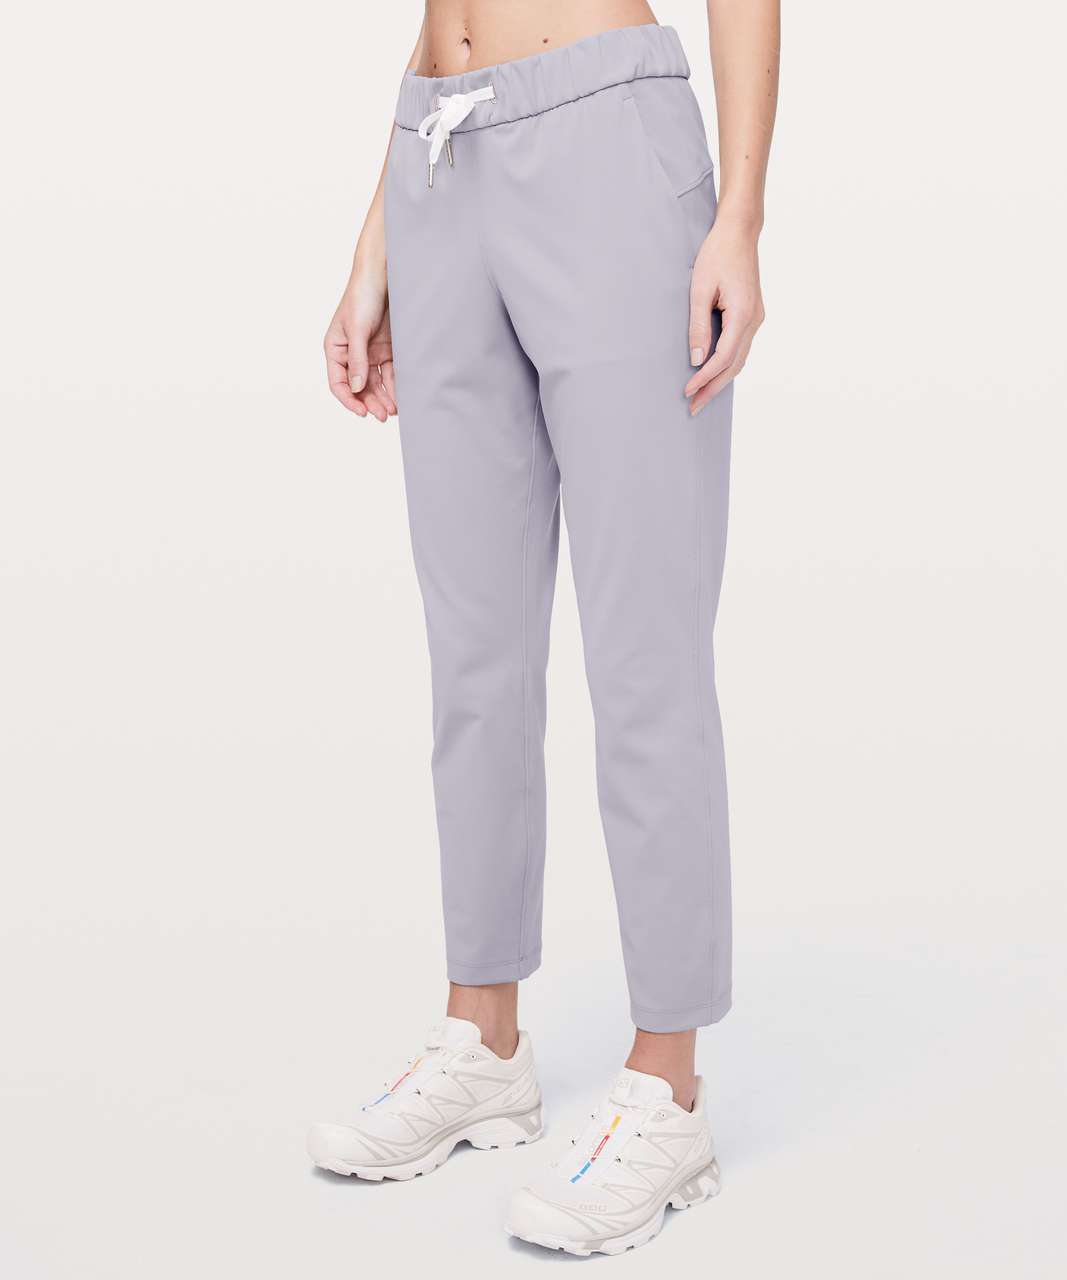 Lululemon On the Fly 7/8 Pant 27" - Silverscreen